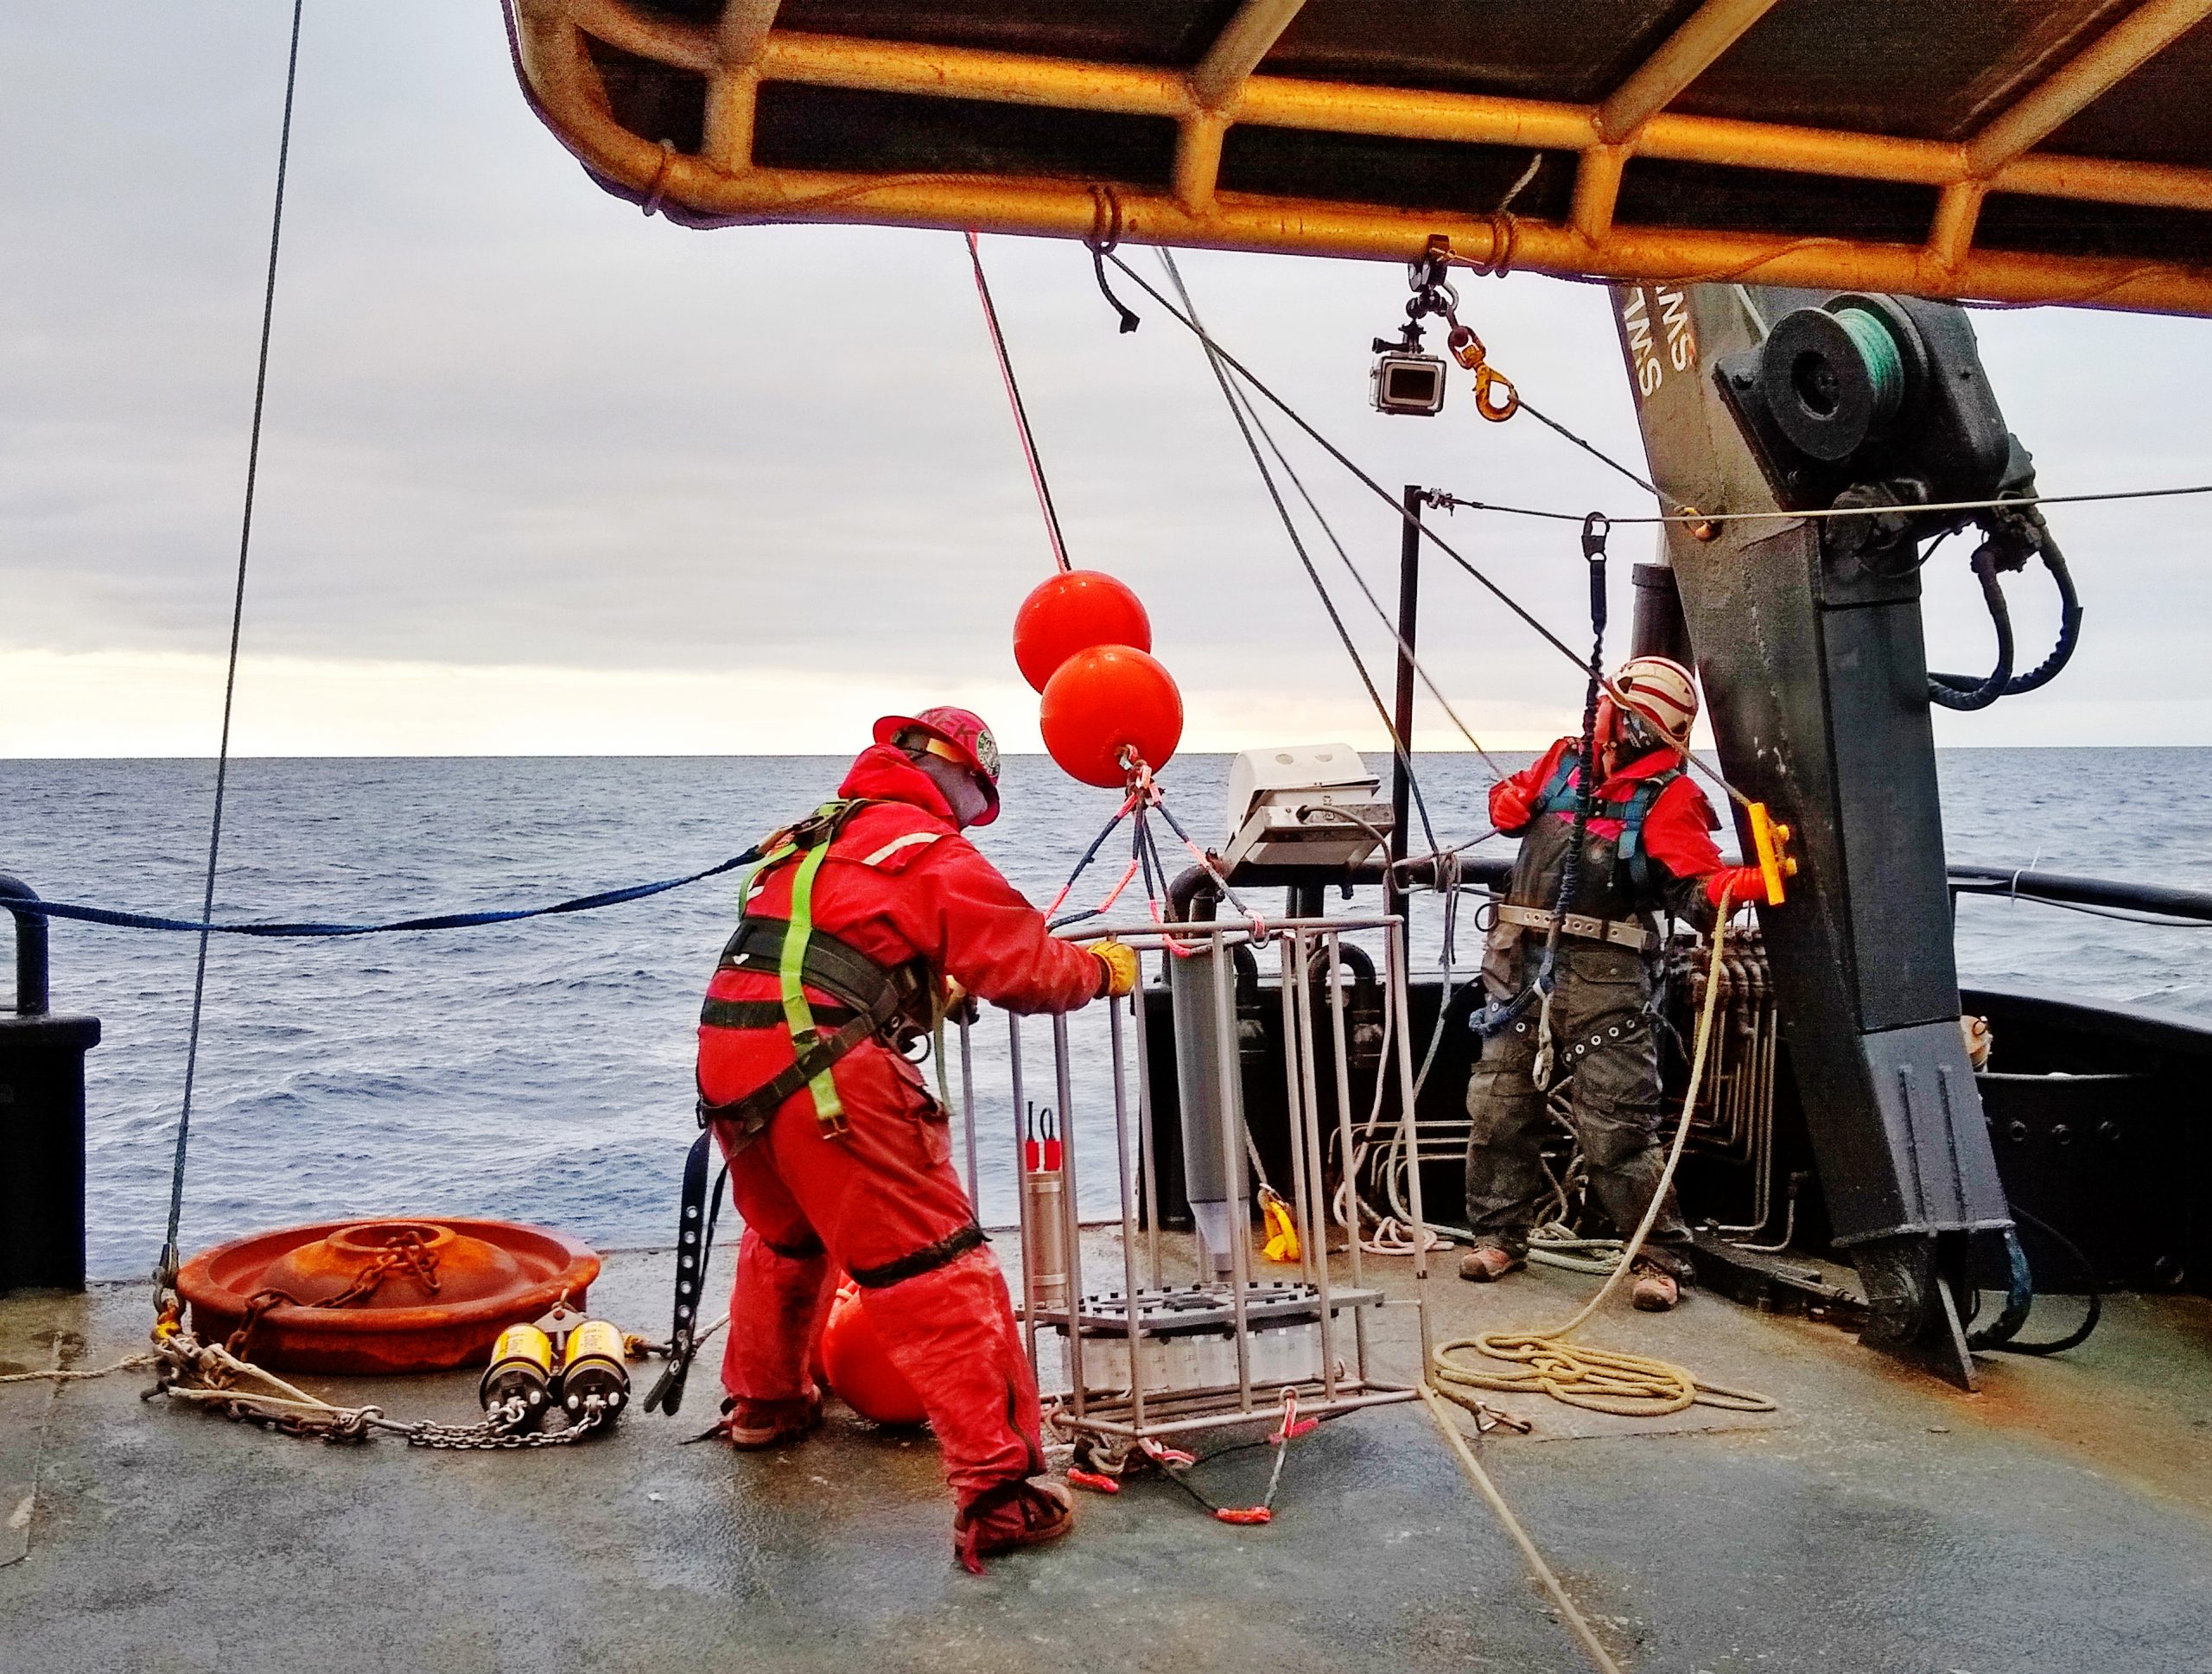 Photo by Savannah Sandy. Scientists deploy a mooring in the Chukchi Ecosystem Observatory from the Norseman II in October 2020. The mooring is equipped with a sediment trap and physical and biogeochemical sensors that will collect oceanographic data for one year.